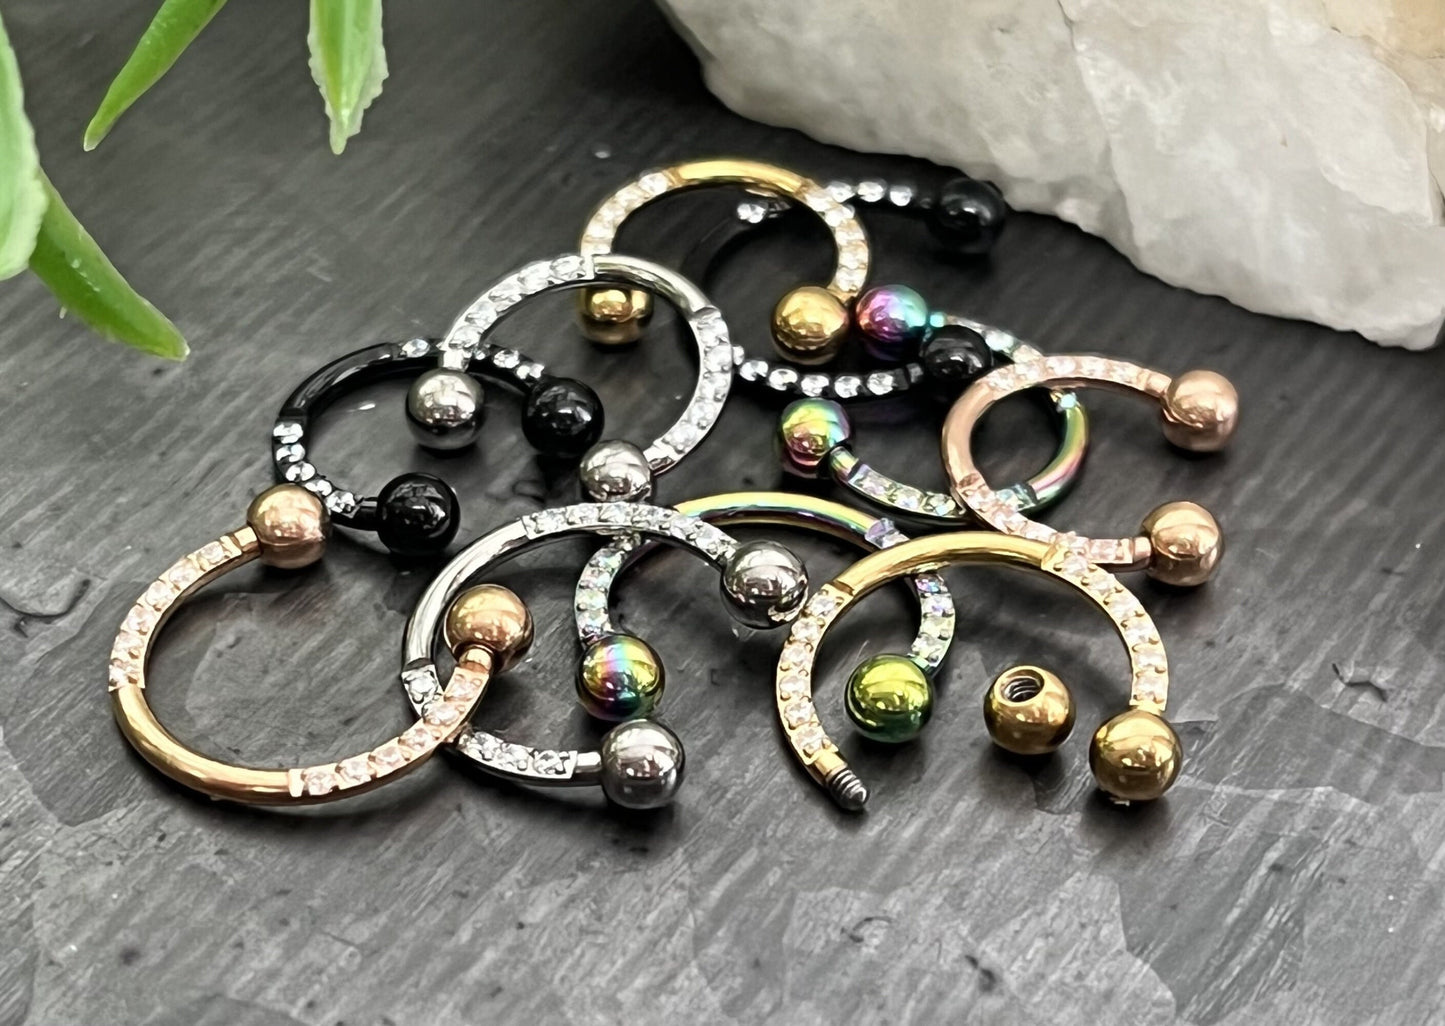 1 Piece Unique Titanium CZ Gem Sides Circular Barbell Horseshoe - 16g - 8 or 10mm- Black, Gold, Multi-Color, Rose Gold and Silver Available!